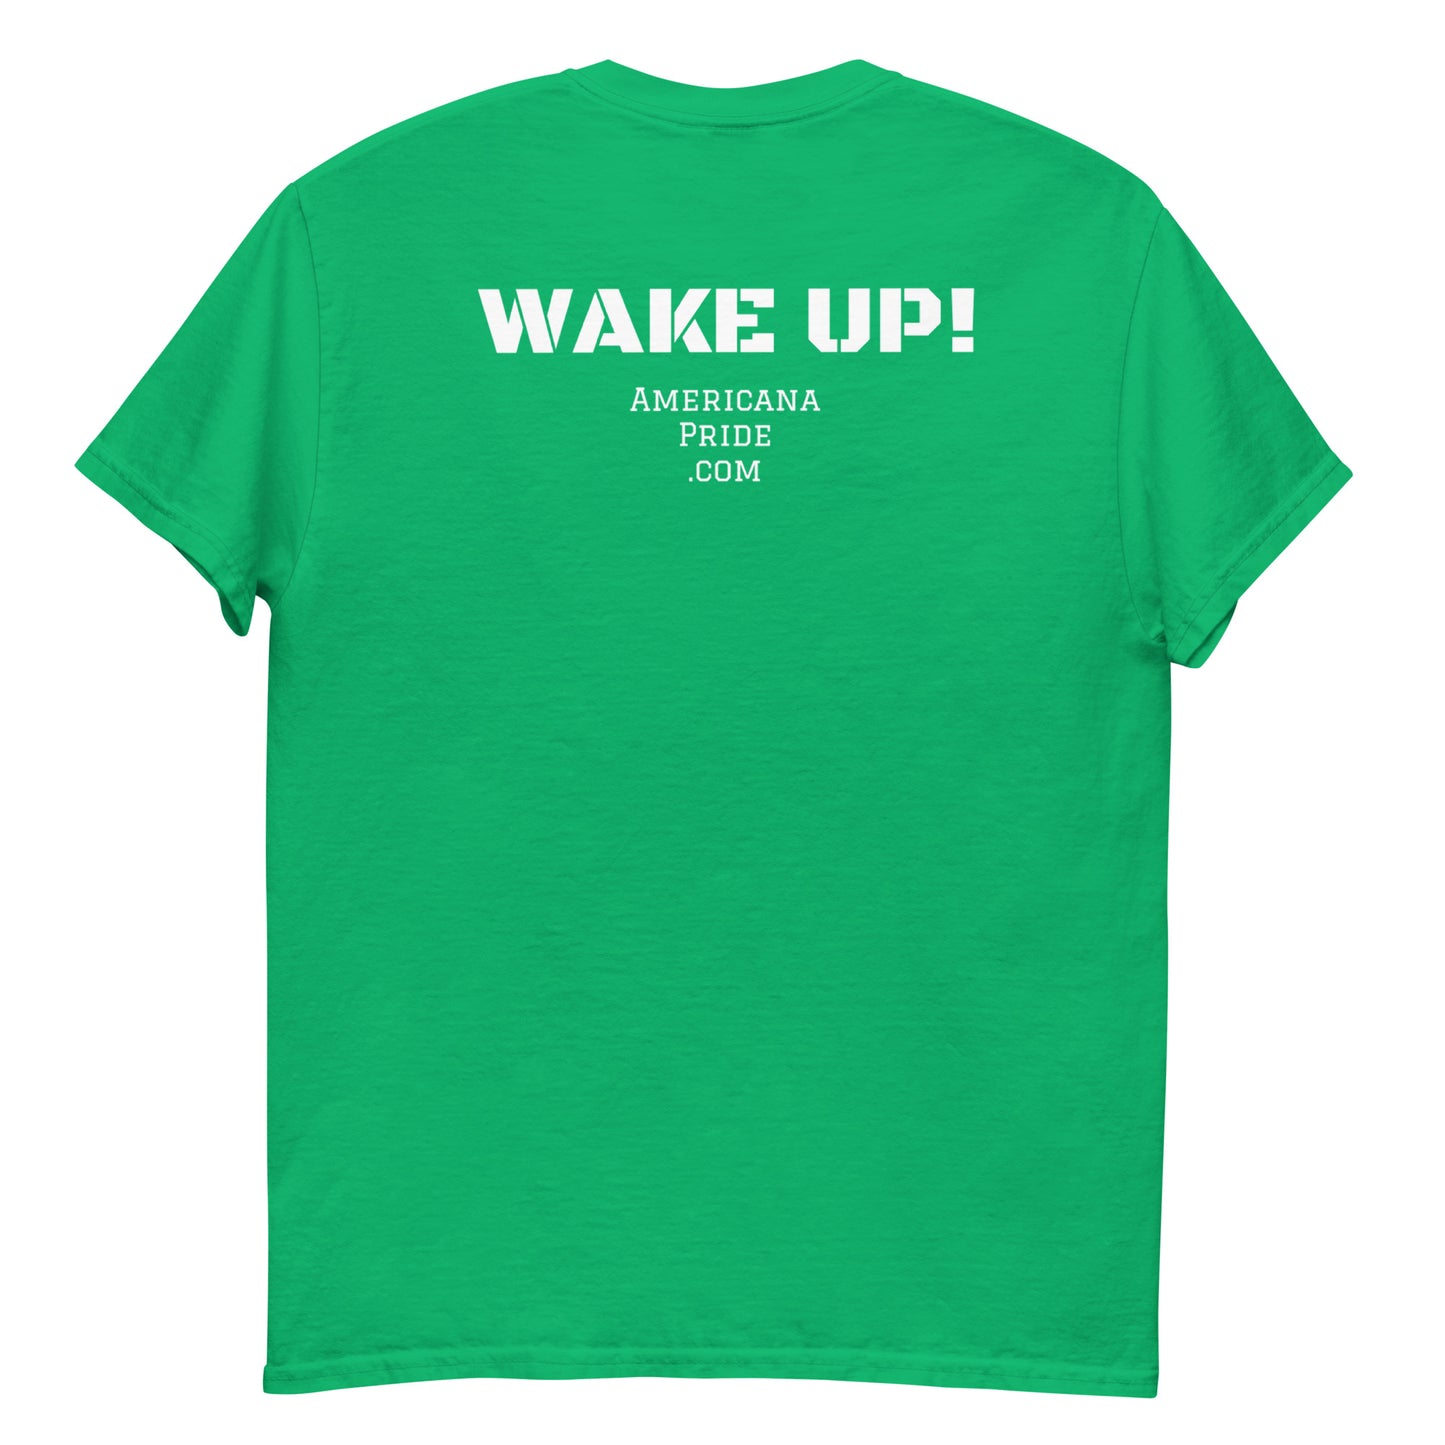 If you are not part of the movement, you ARE the movement - Wake up! classic tee